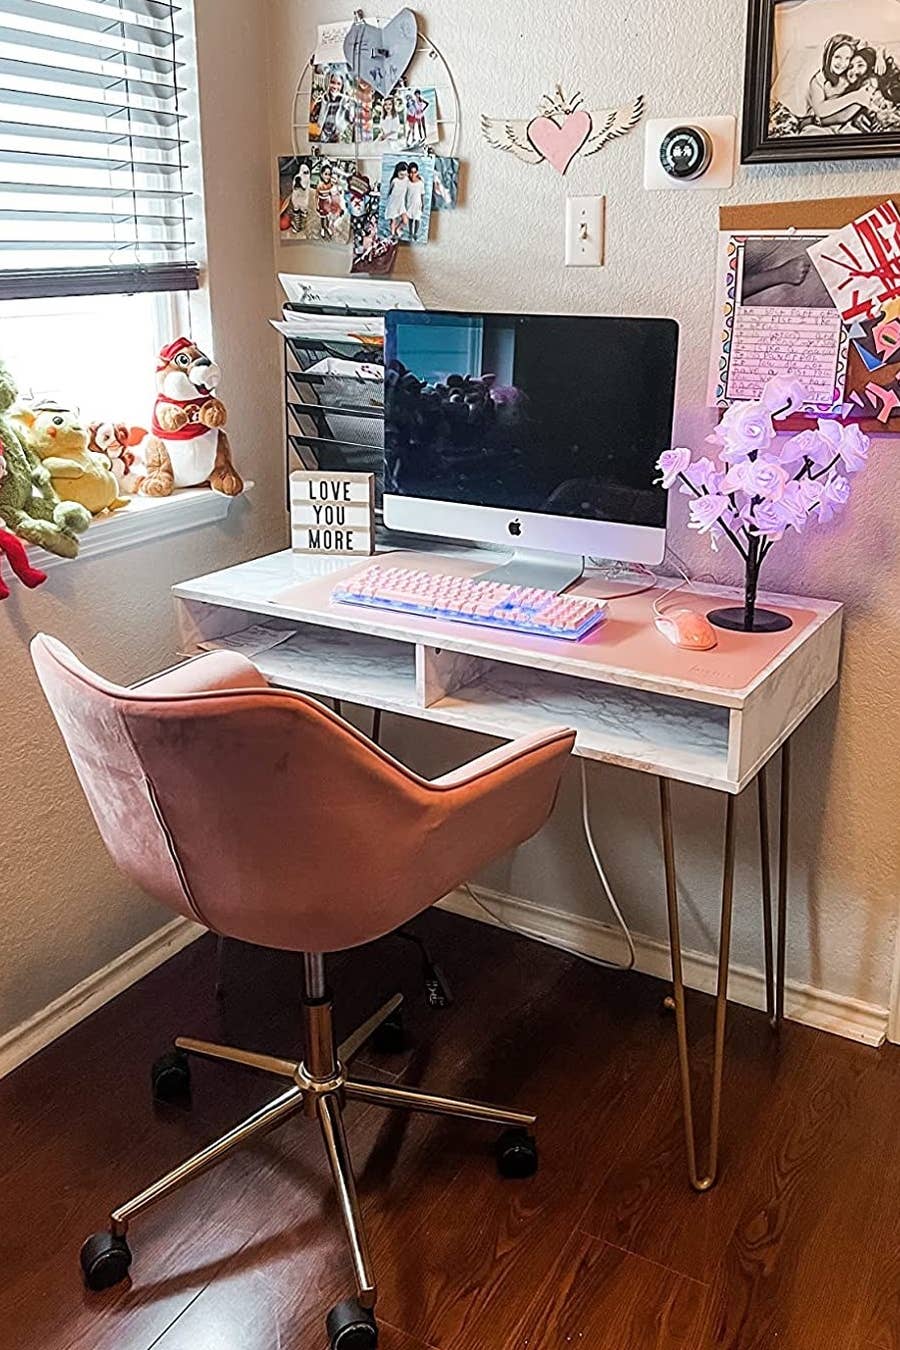 19 Aesthetic Desk Decor Ideas That'll Make You Actually Want To